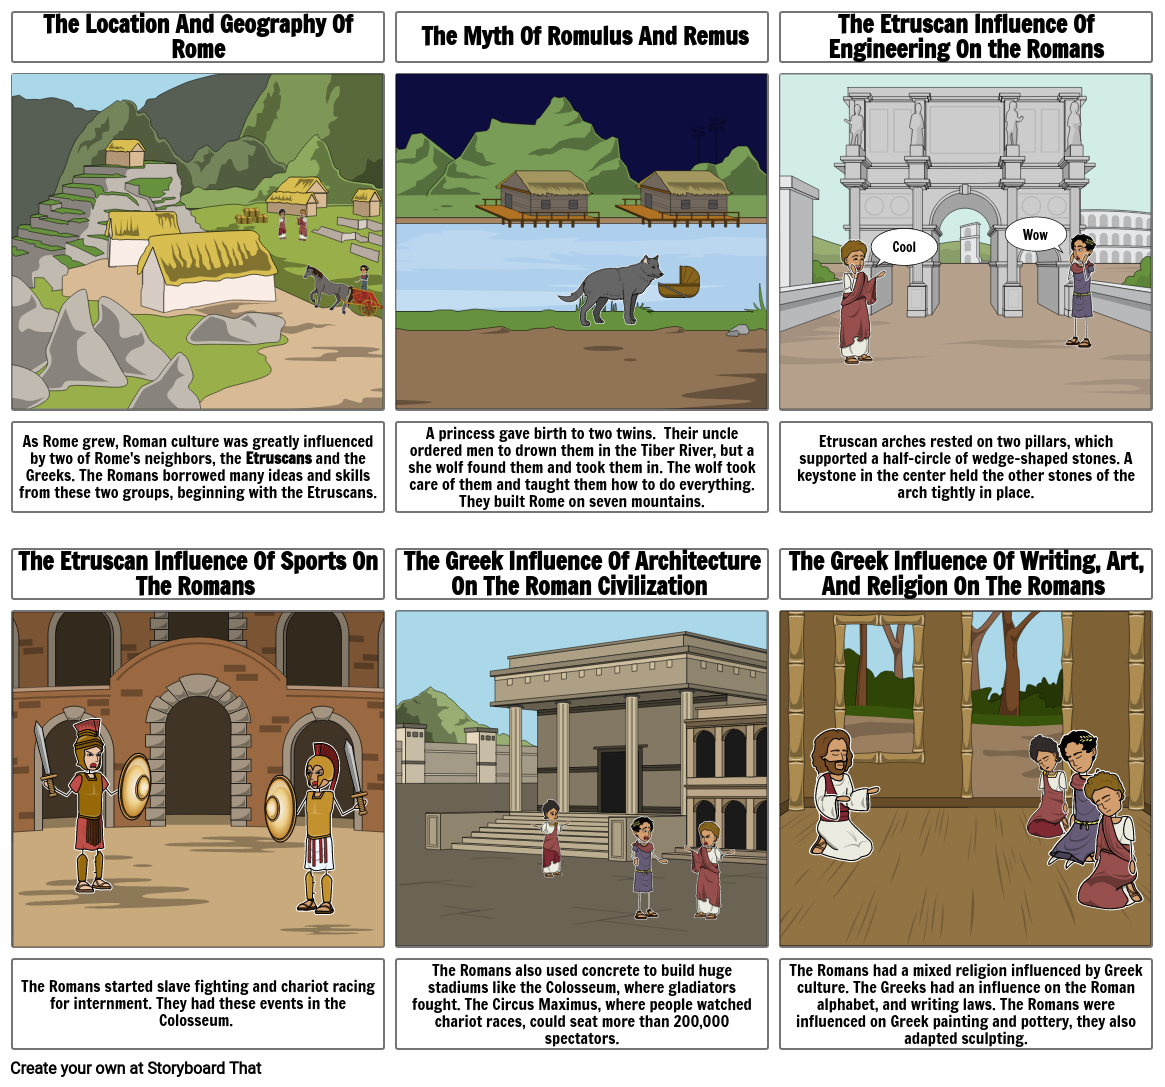 The Geography and Early Development of Rome Storyboard